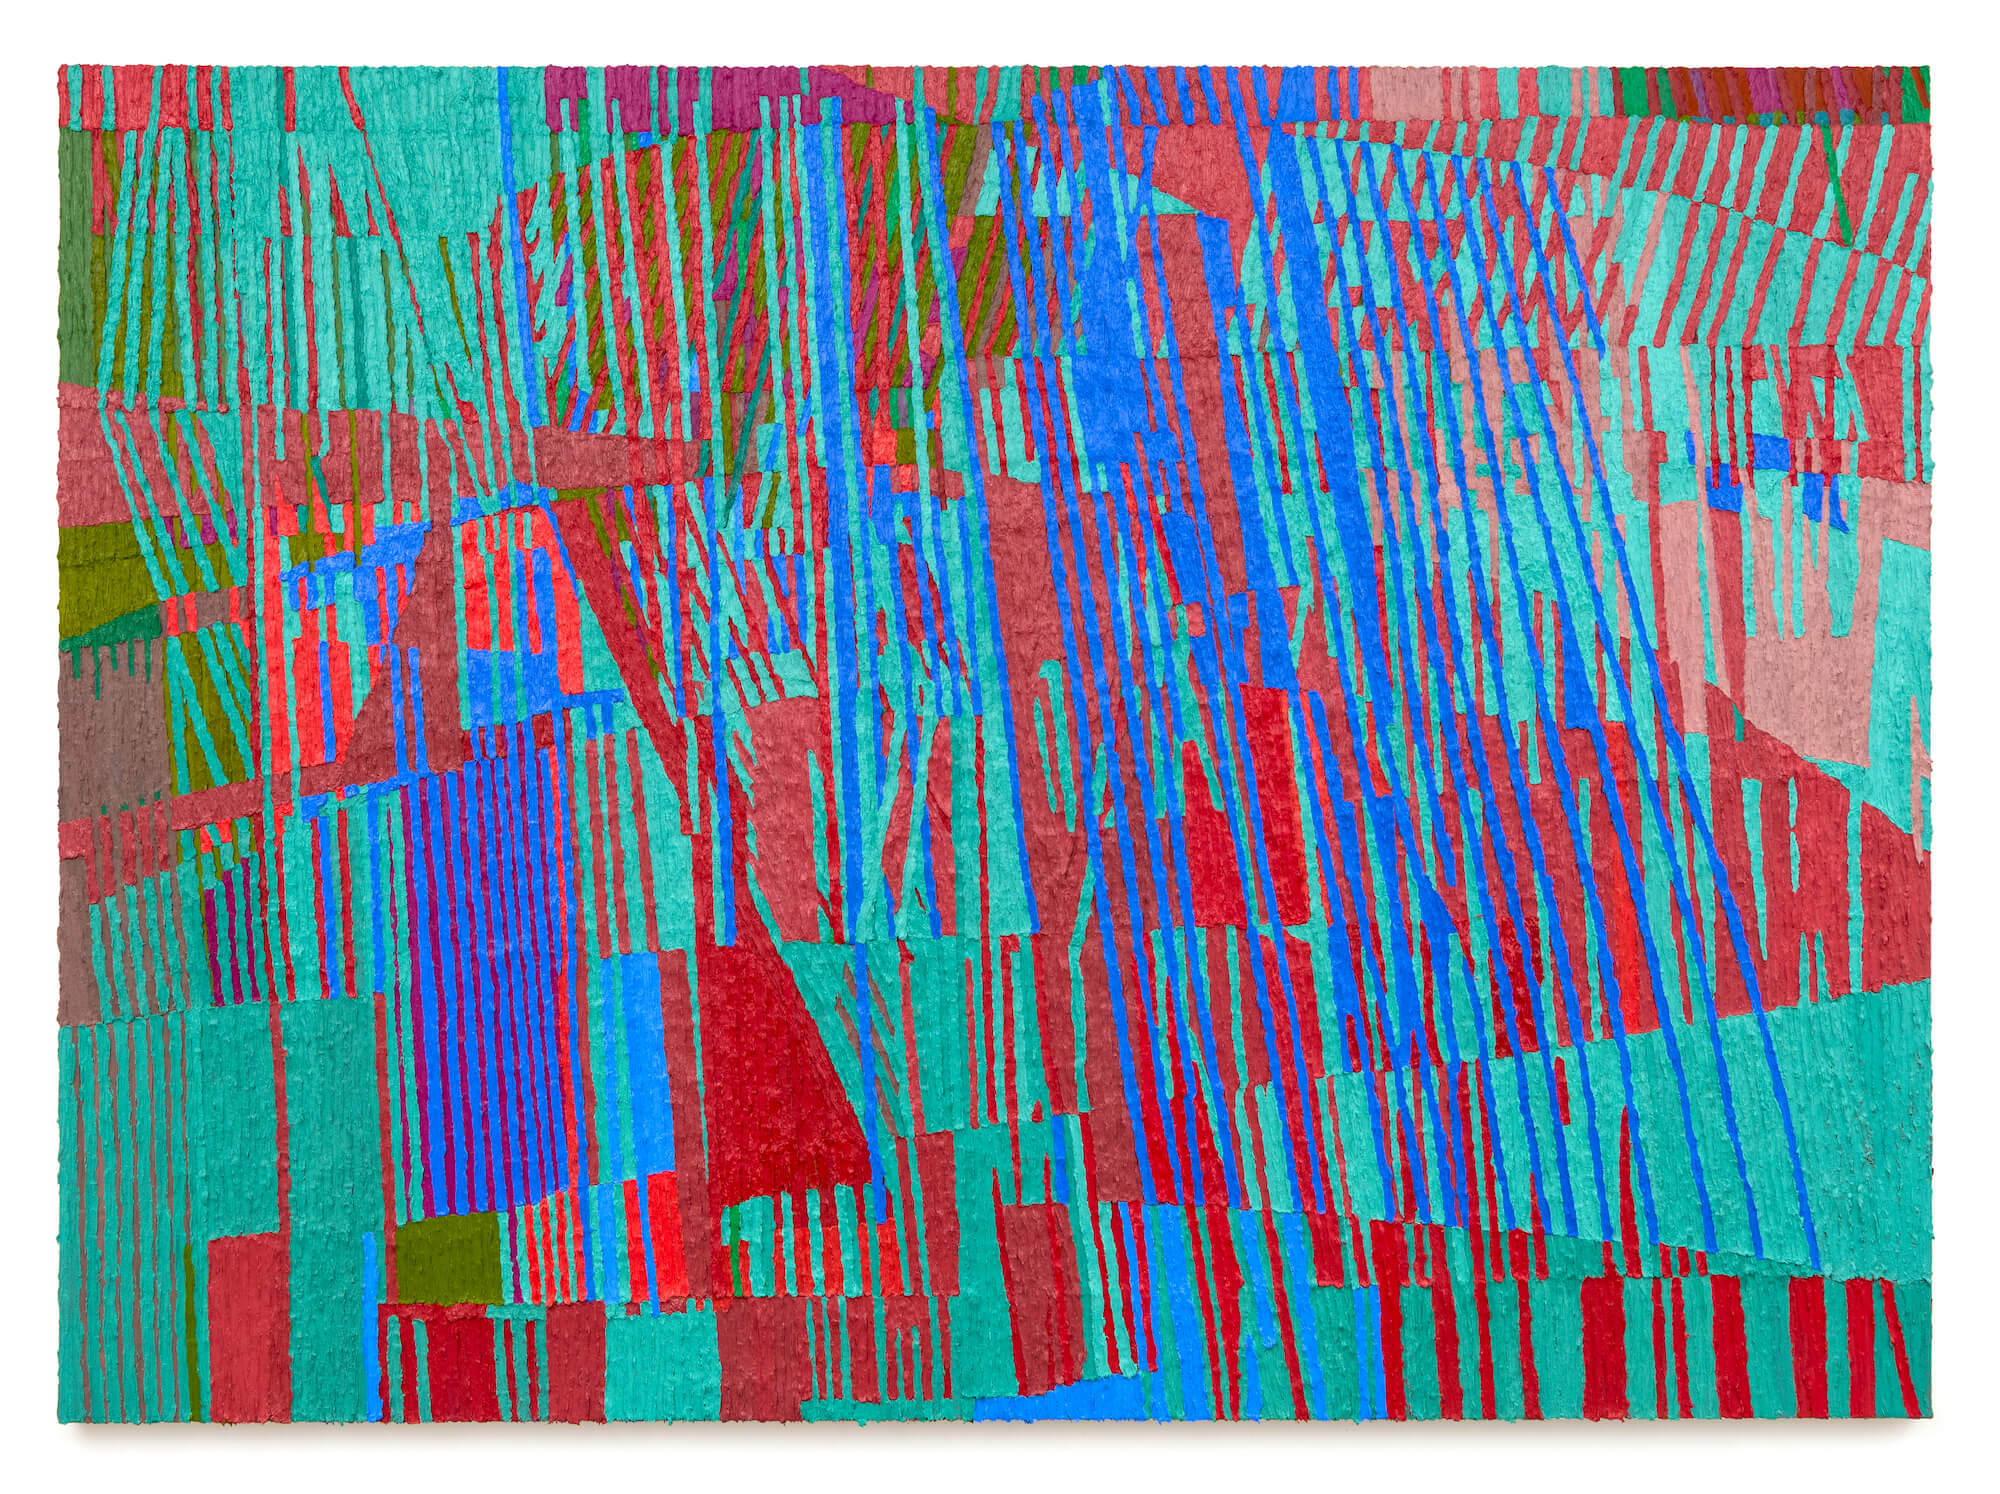 Profusion, for Valéry, 2021-2022, oil on canvas, 66 x 91 inches